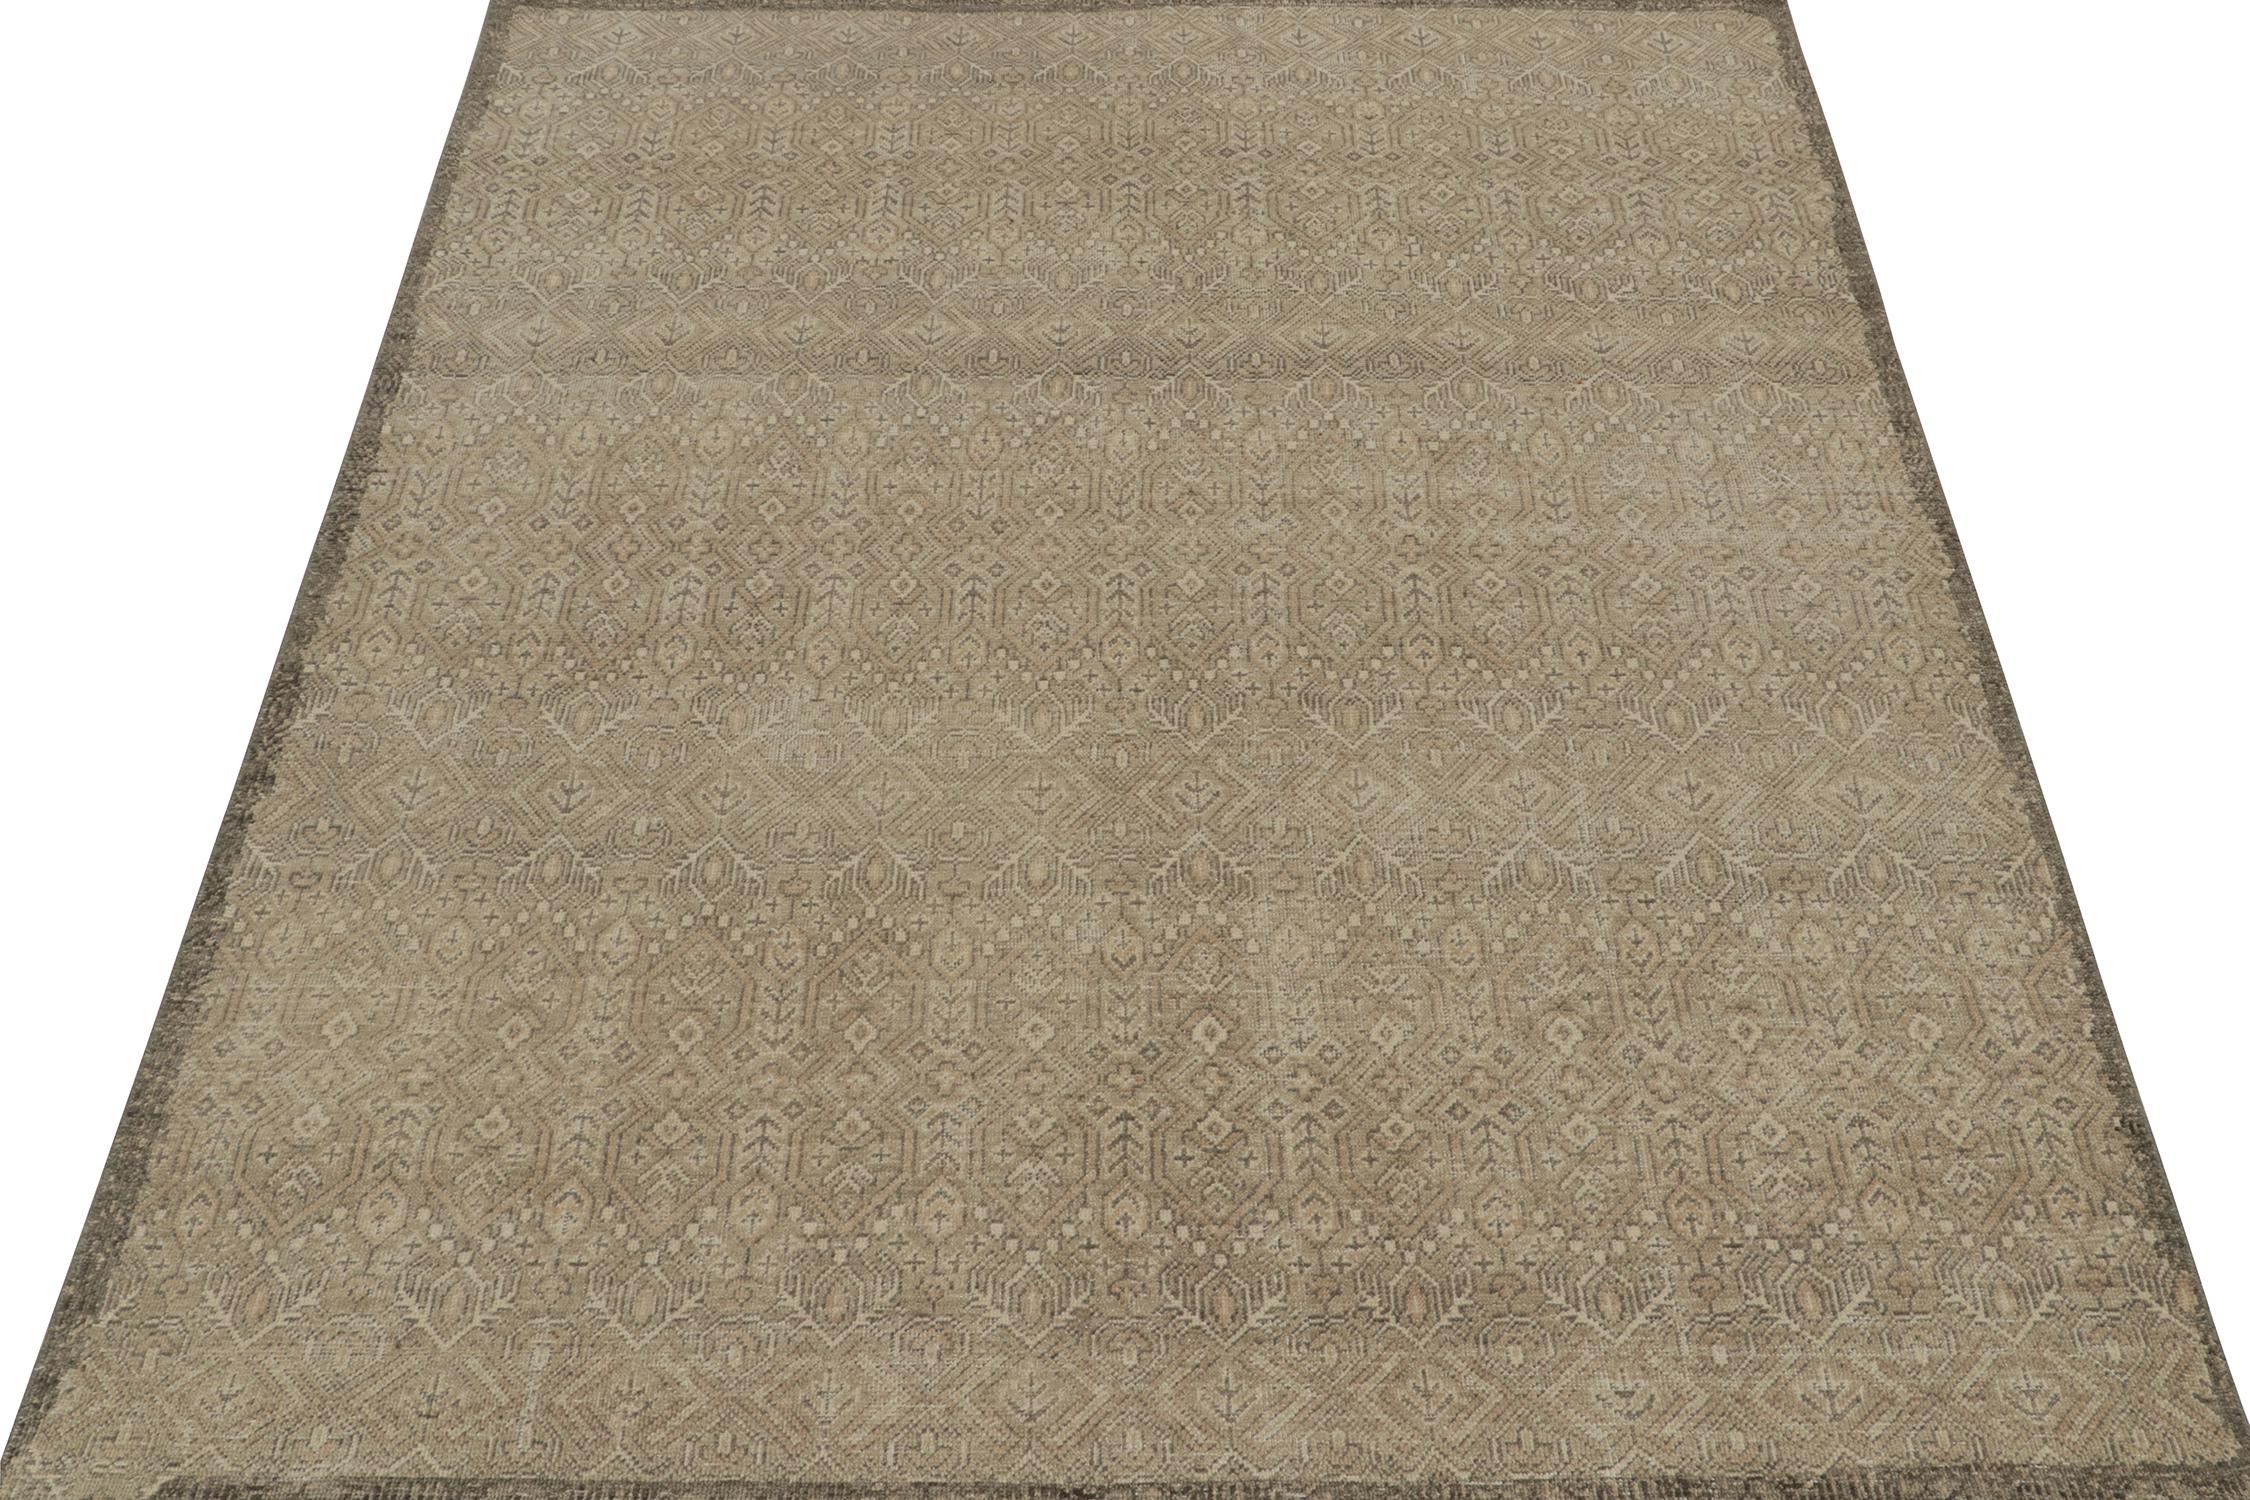 Indian Rug & Kilim’s Distressed Tribal style rug in Beige and Gray Geometric Patterns For Sale